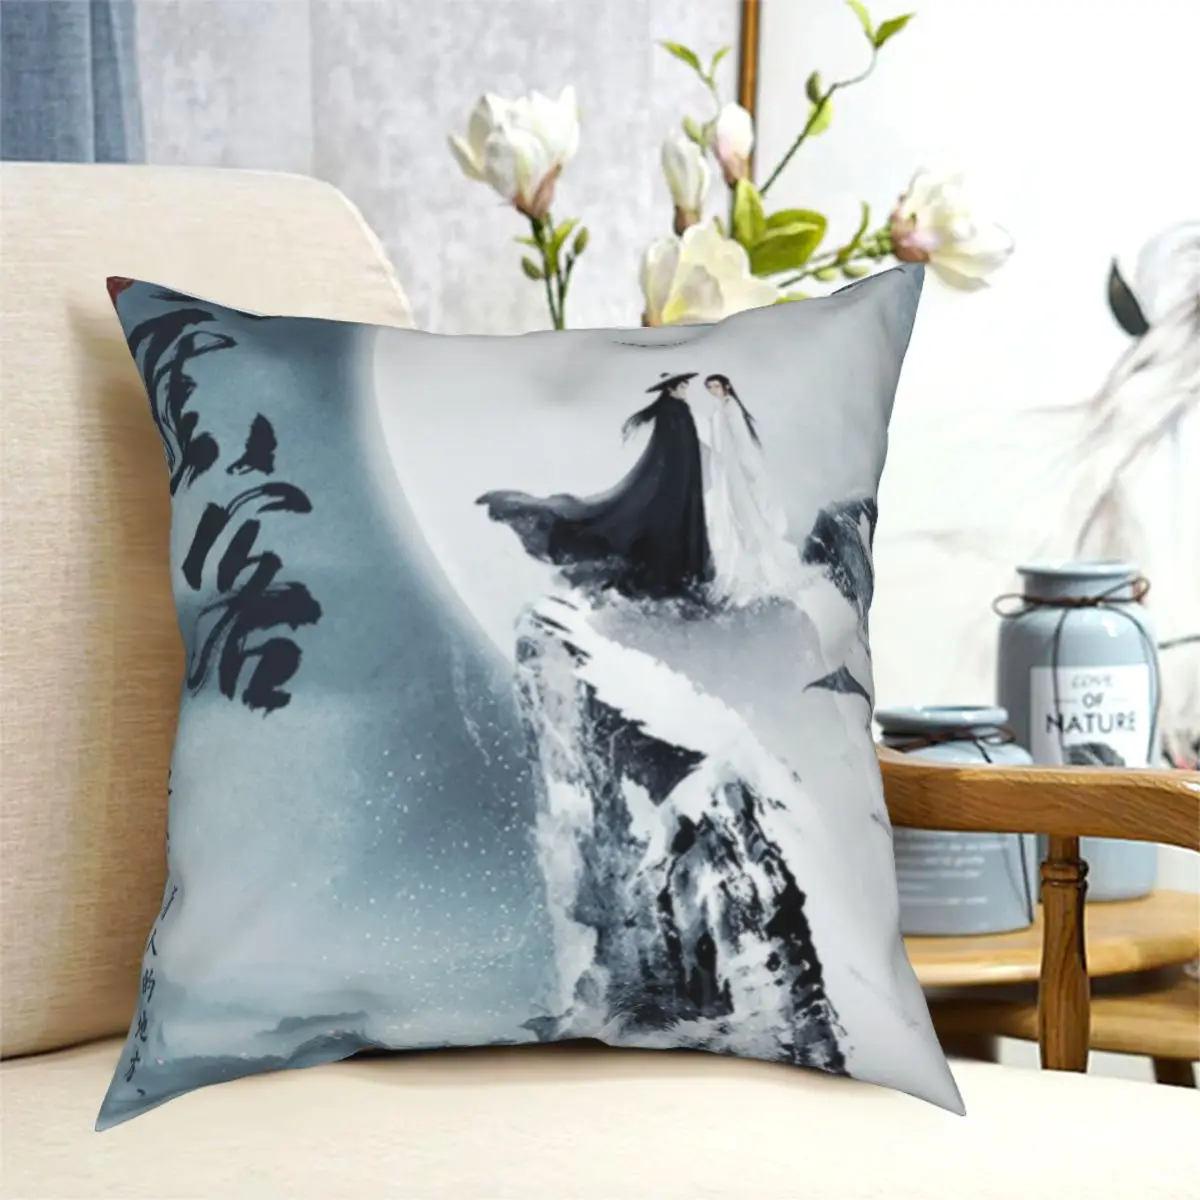 

Word Of Honor Faraway Wanderers Pillowcase Printed Fabric Cushion Cover Decor Throw Pillow Case Cover Car Square 45*45cm